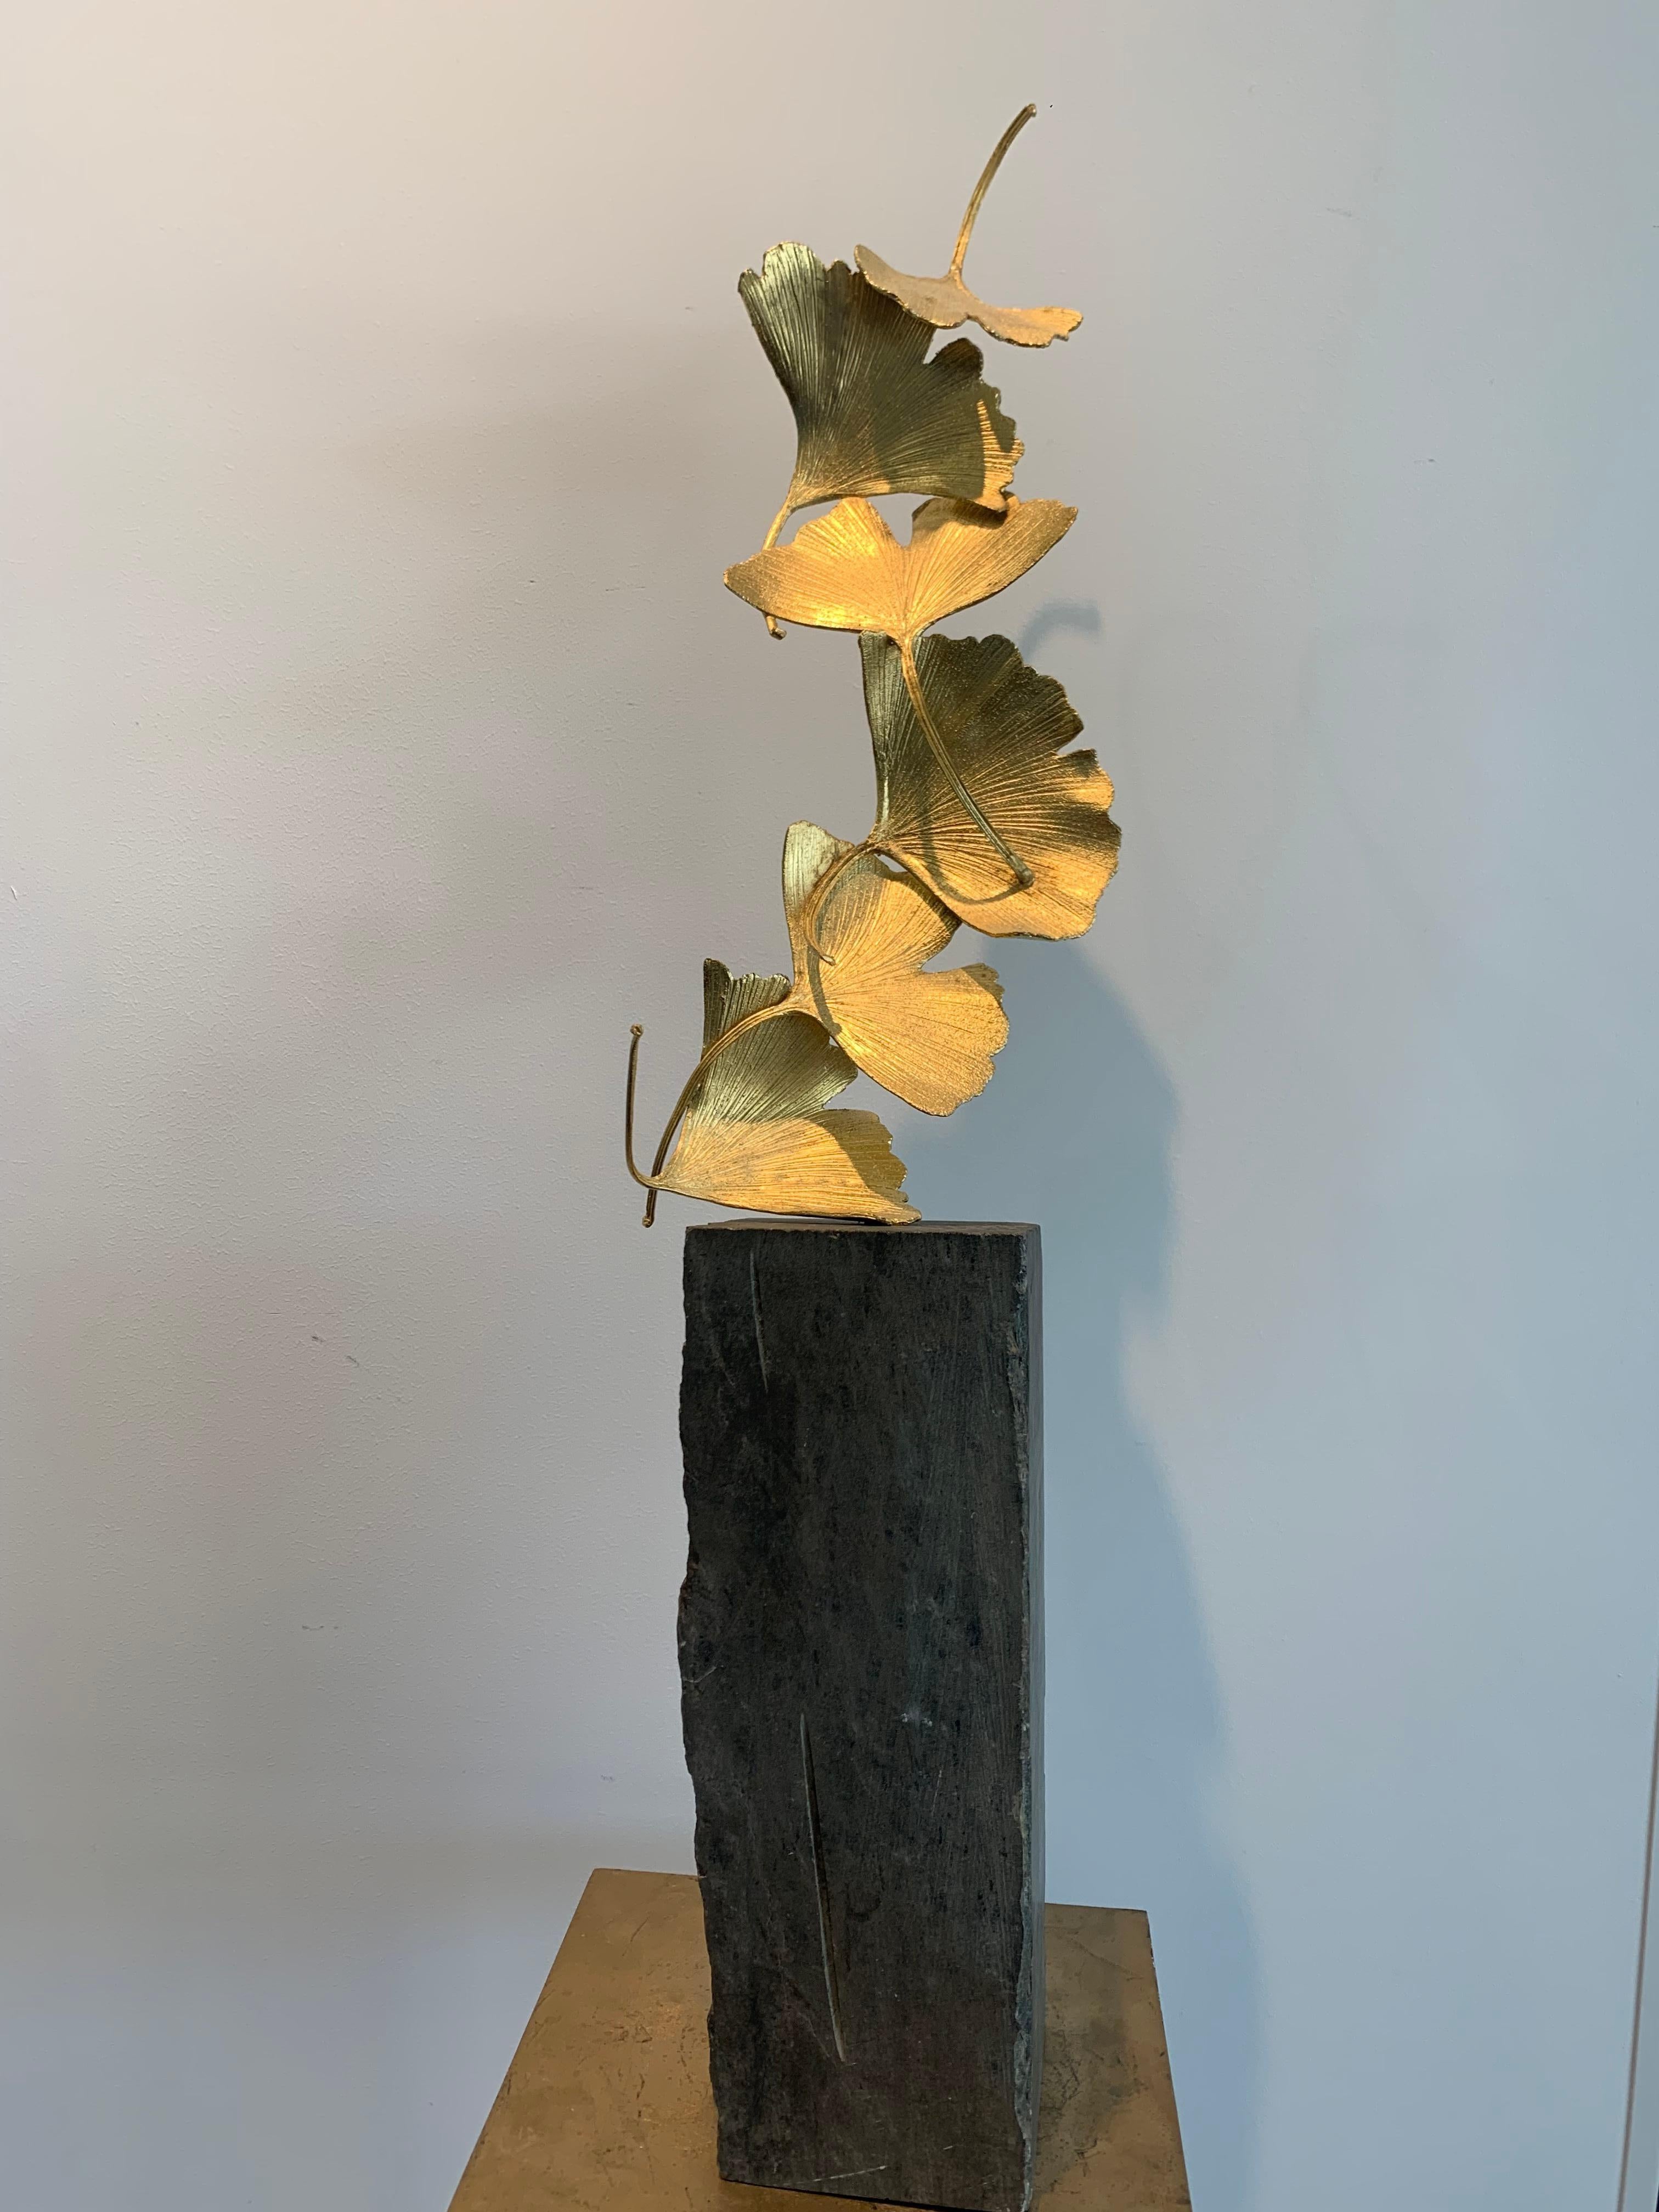 6 Golden Gingko Leaves - 24 k Gilded Cast Brass sculpture on rough stone base - Sculpture by Kuno Vollet